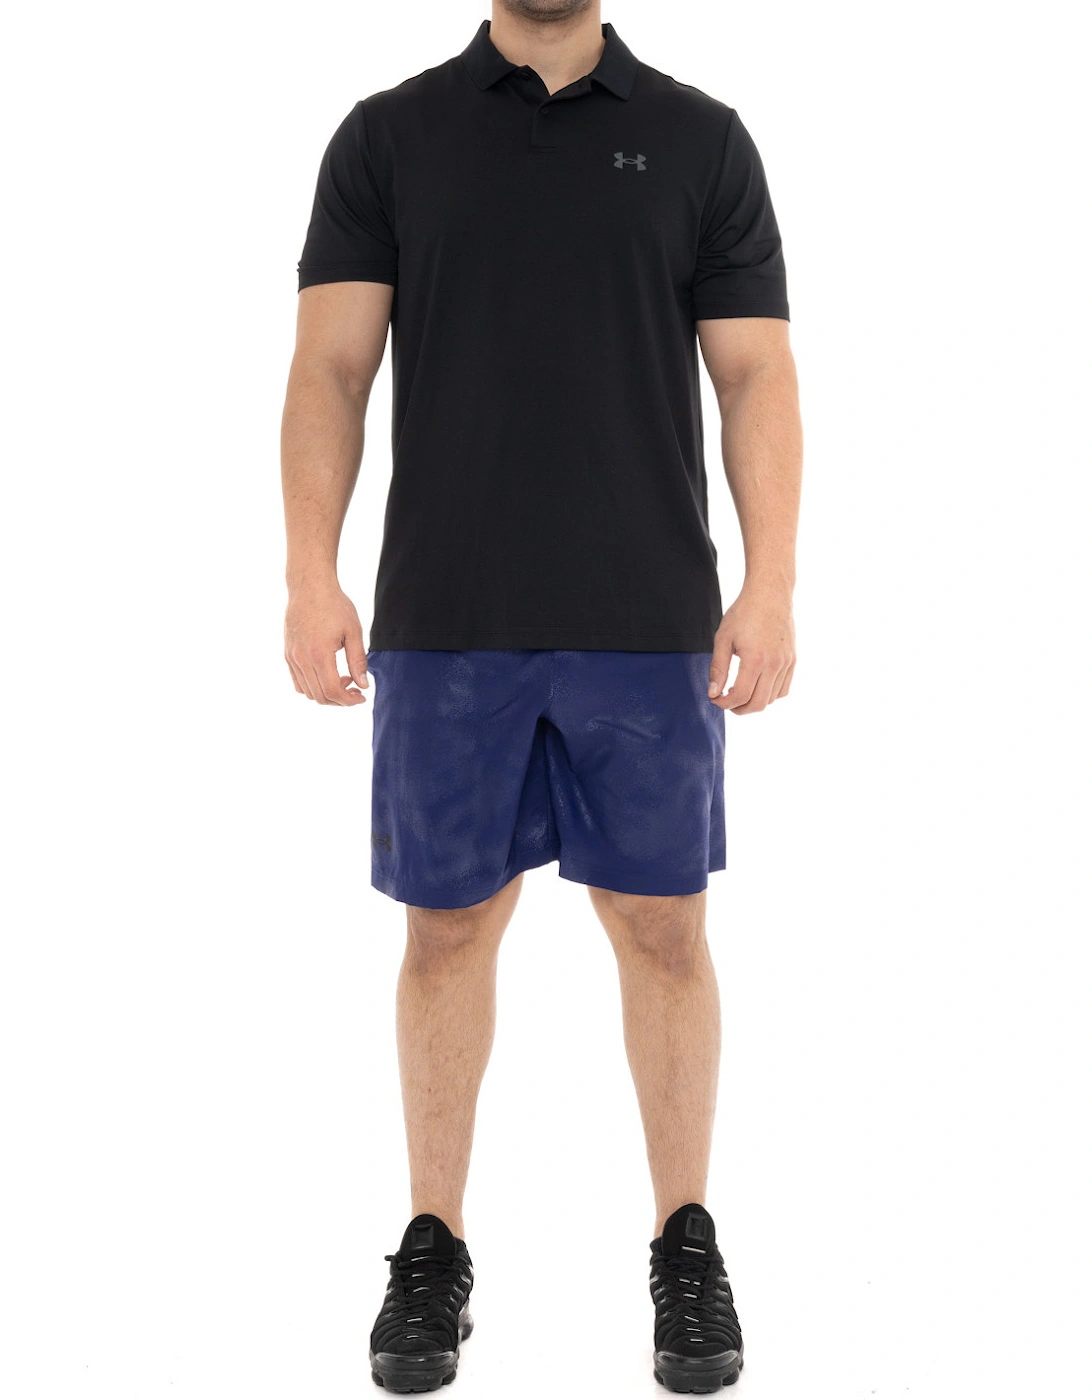 Mens Woven Embossed Shorts (Blue)